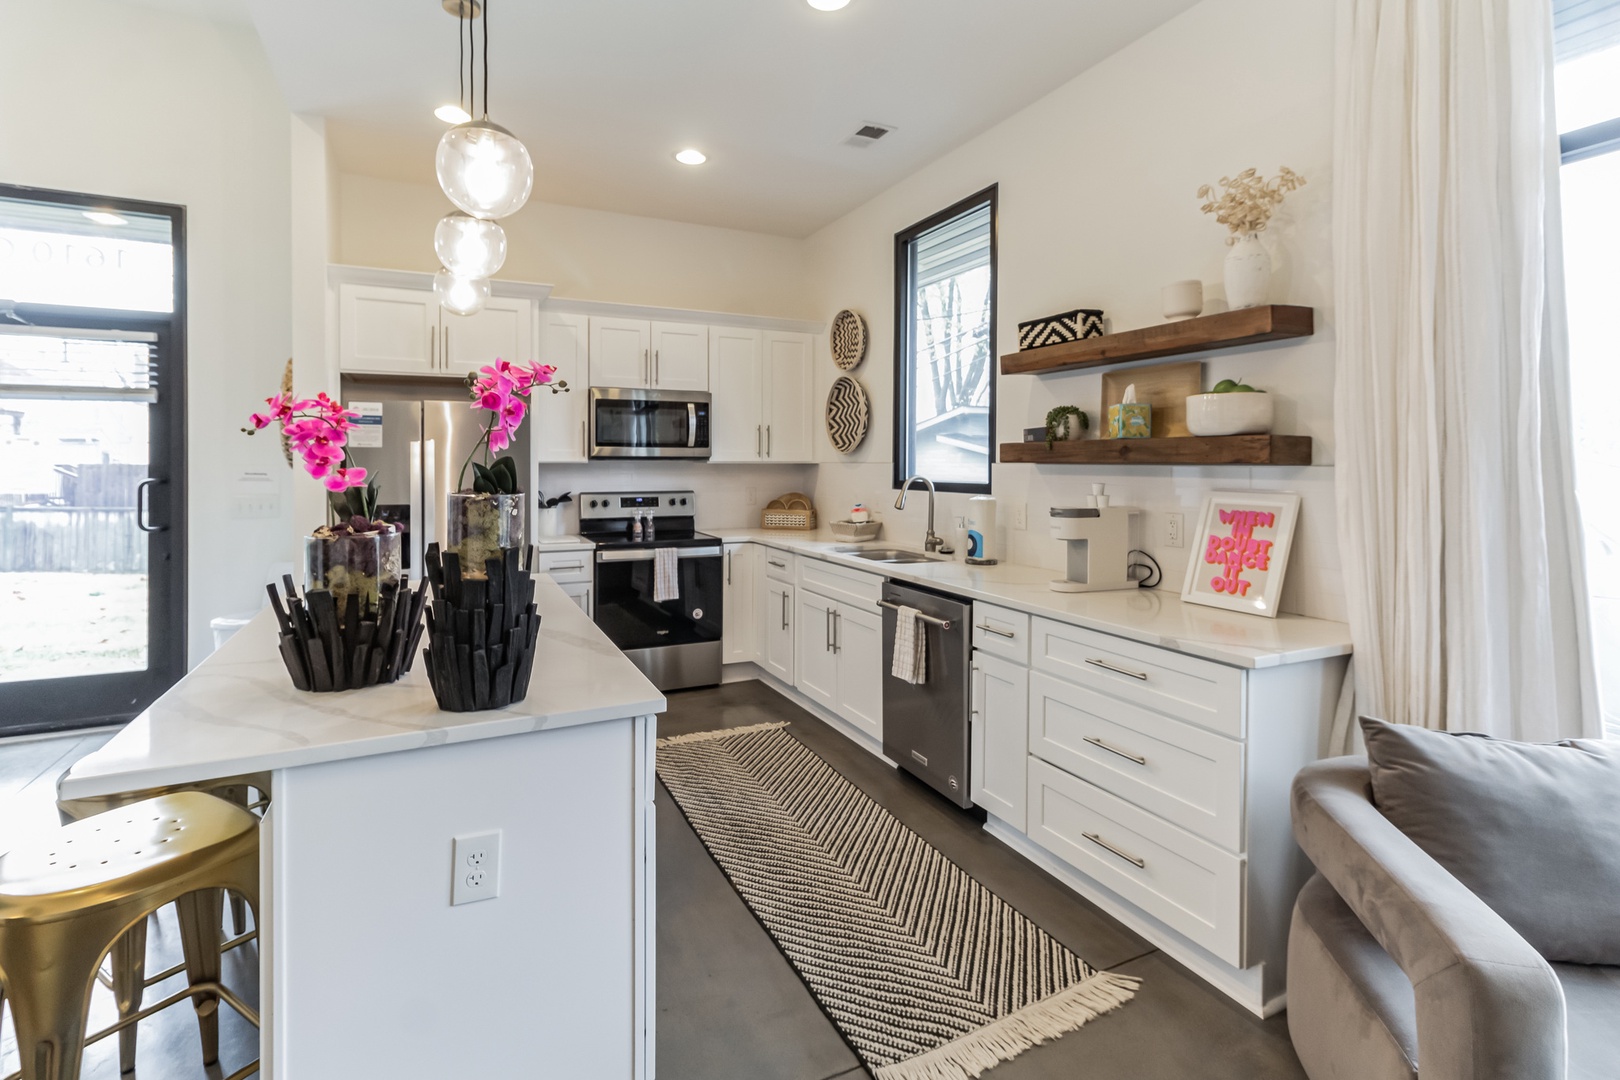 Unit C1: The sleek, updated kitchen offers ample space & all the comforts of home